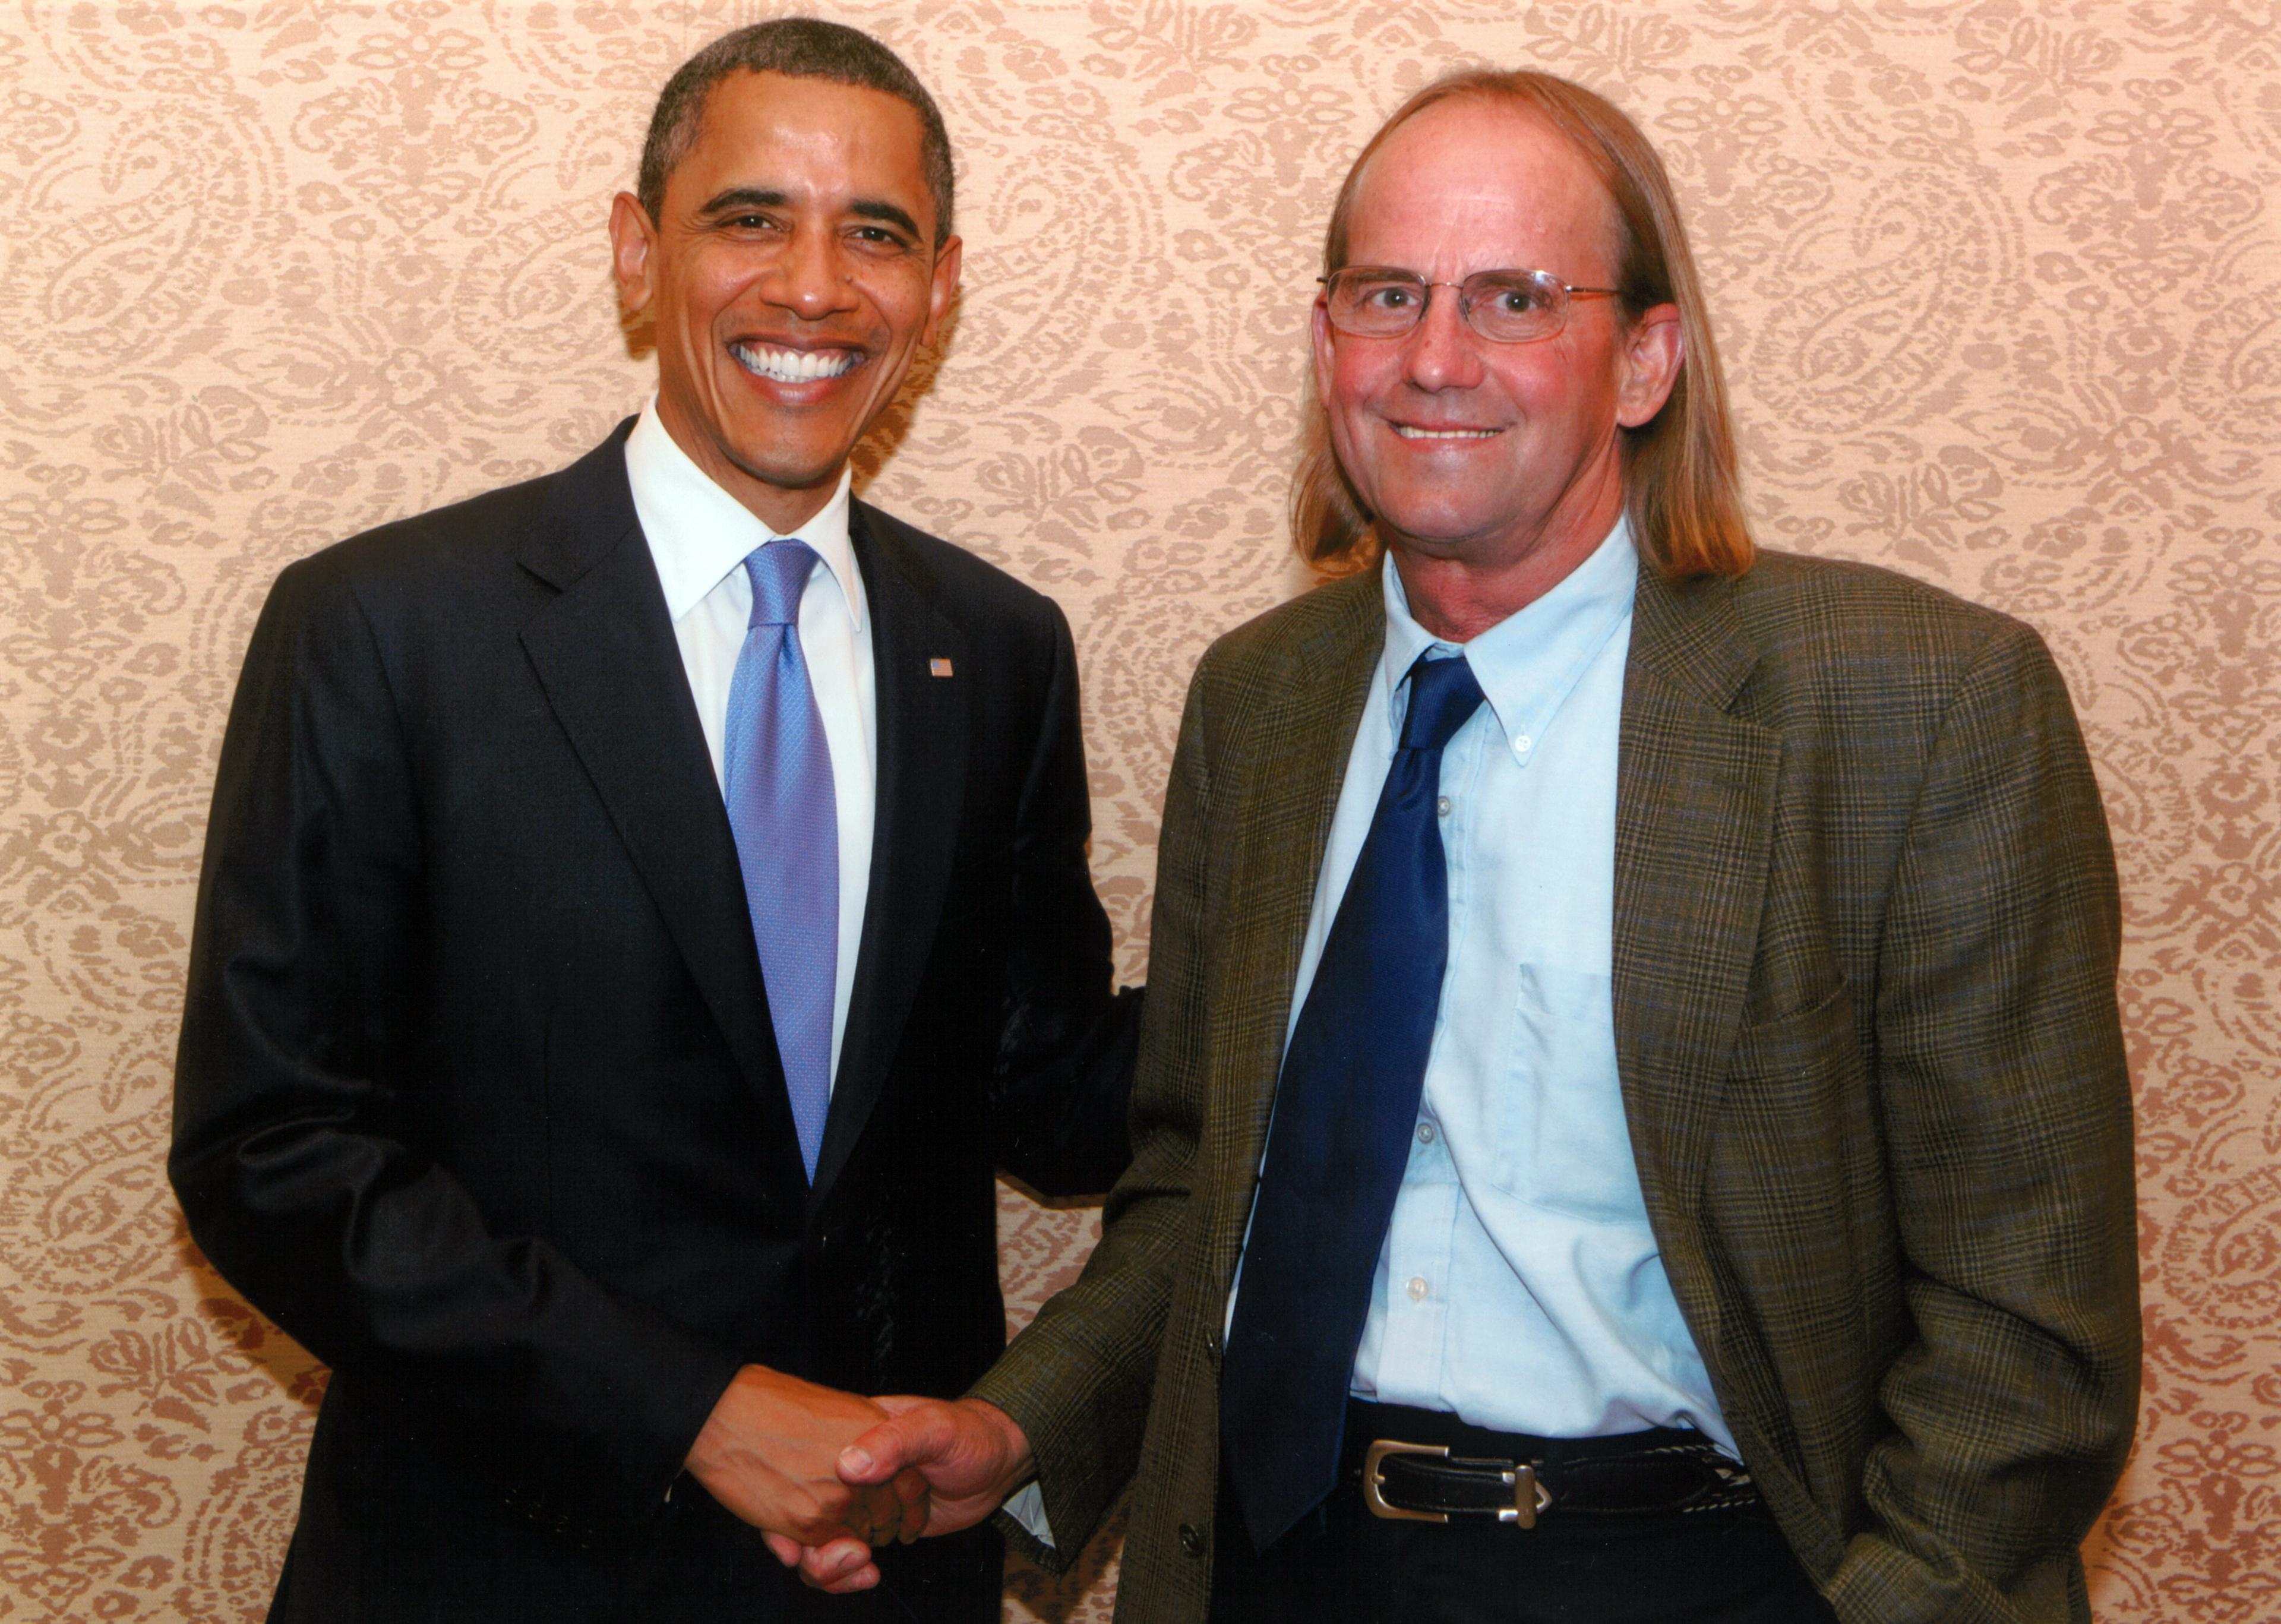 George Siemon shakes hands with former President Barack Obama in Washington, D.C. 